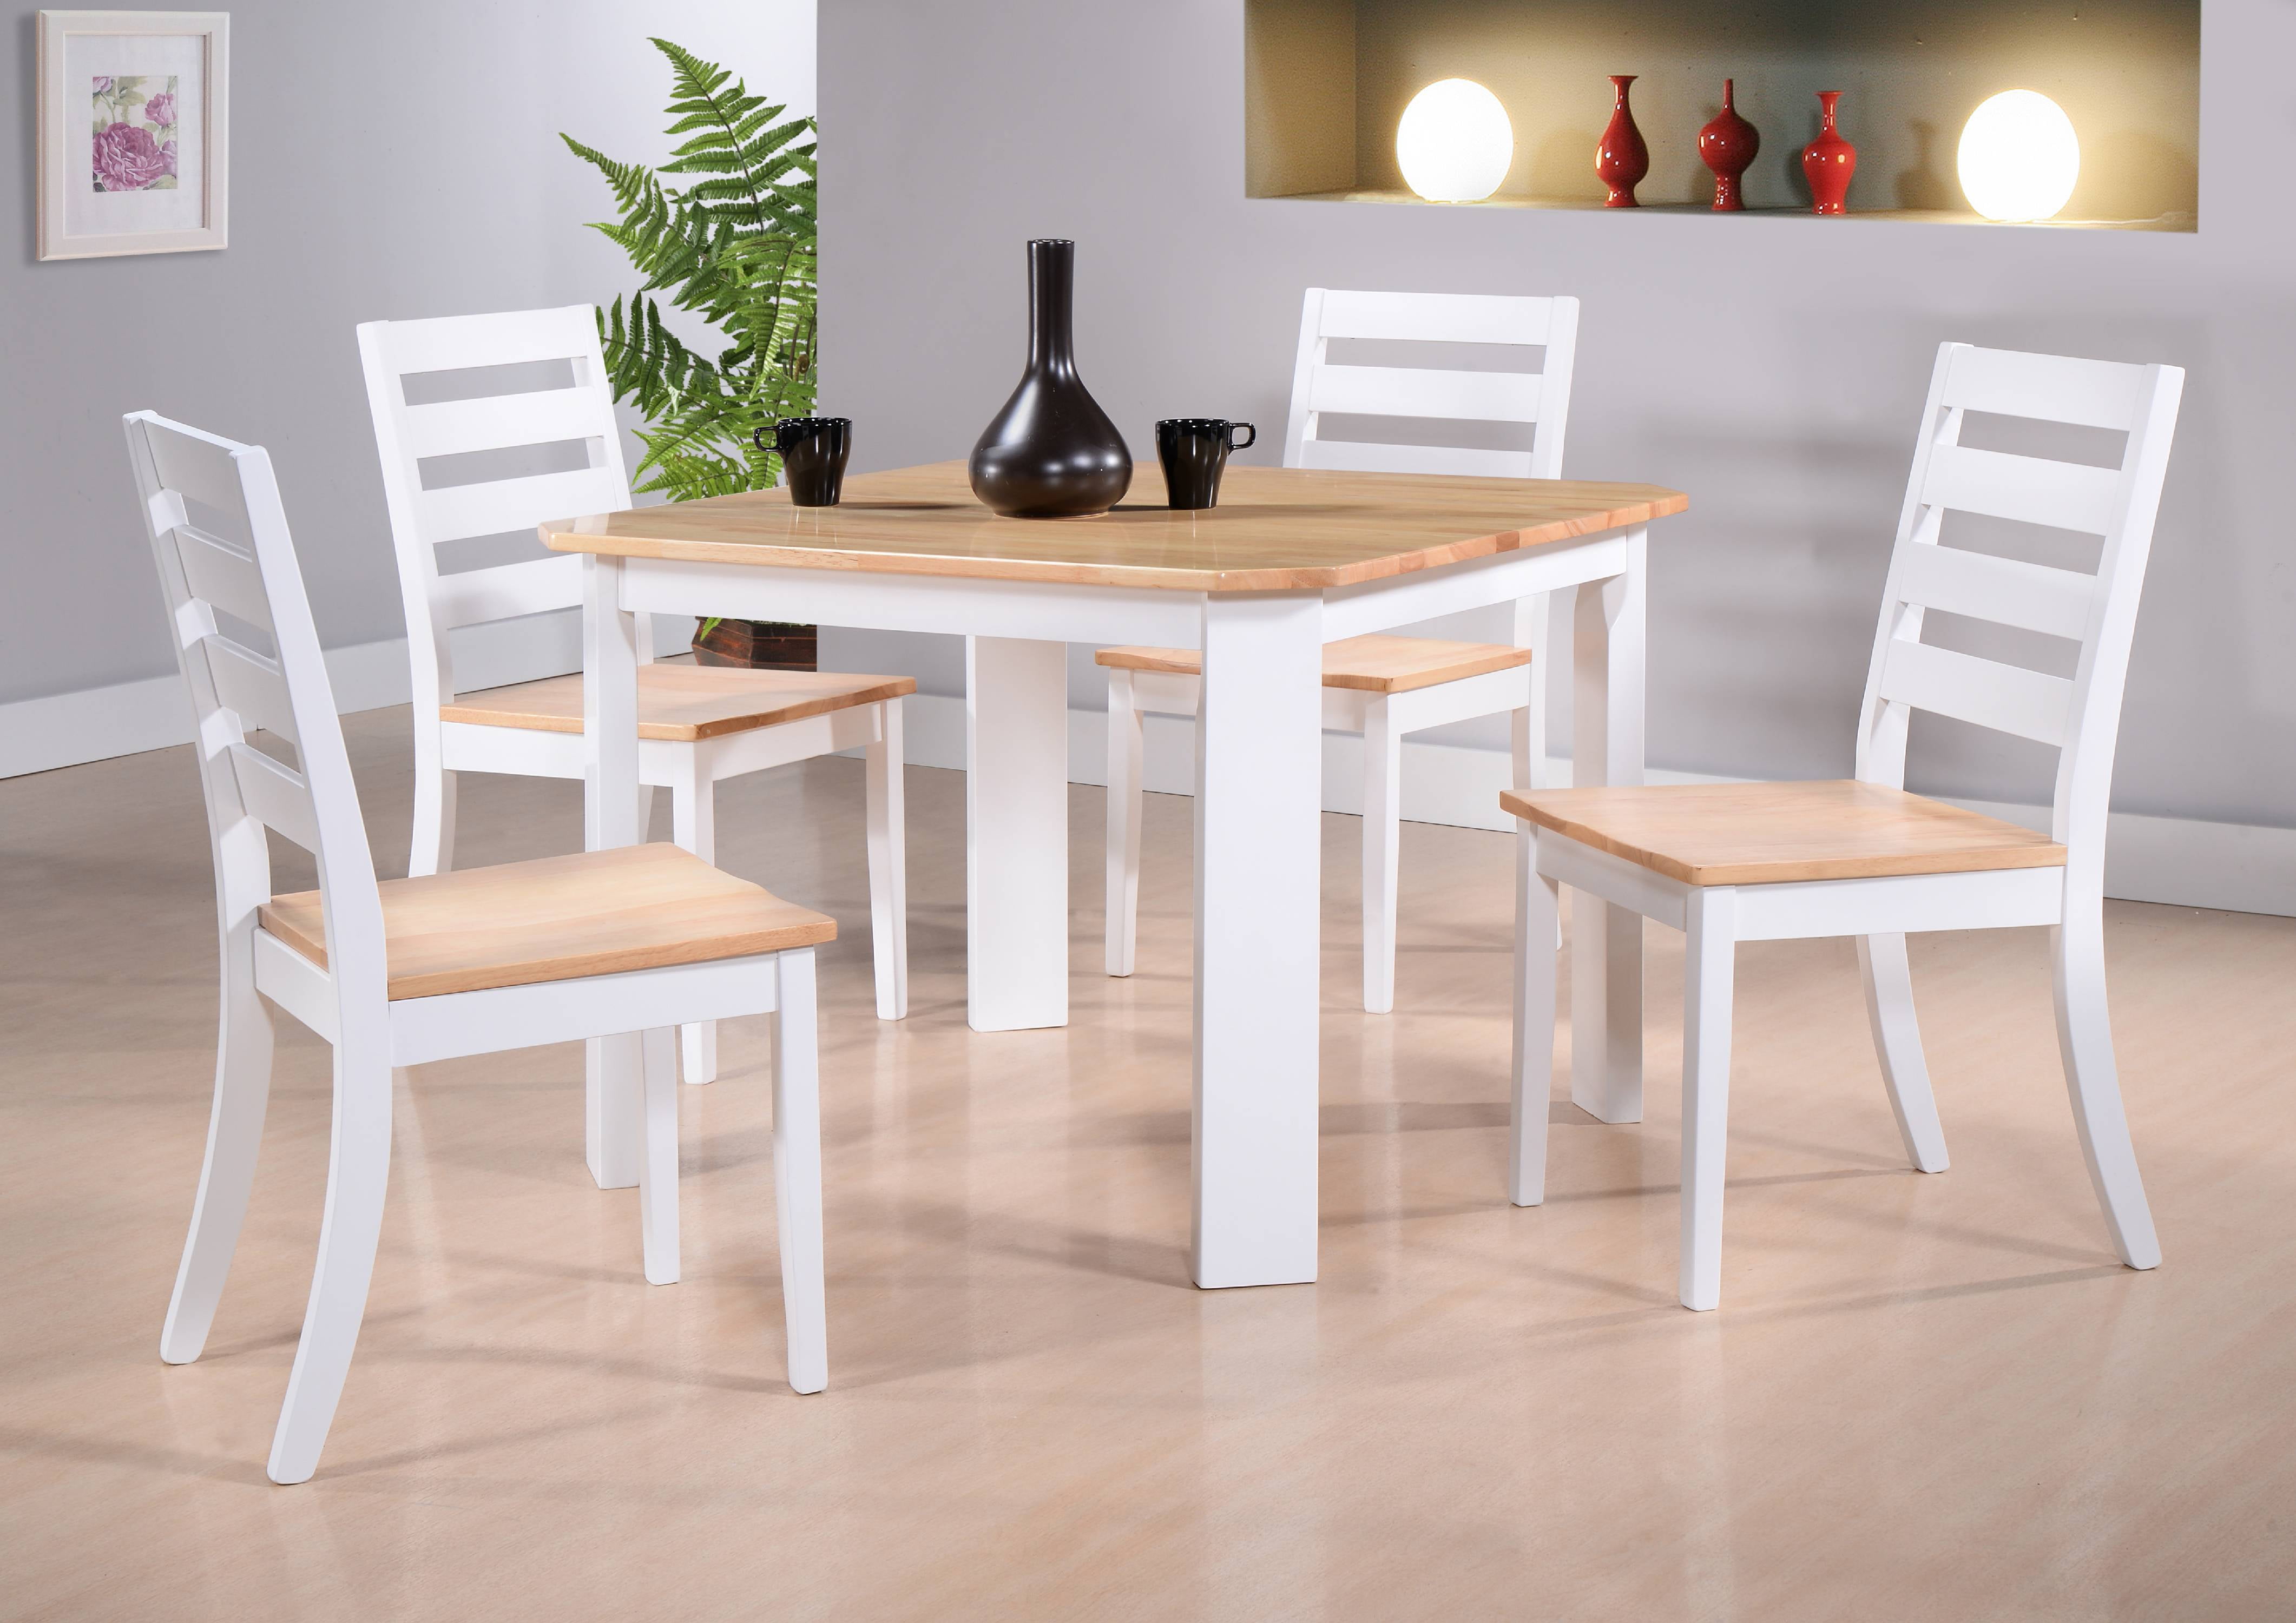 Kitchenette Table And Chair Sets - Image to u